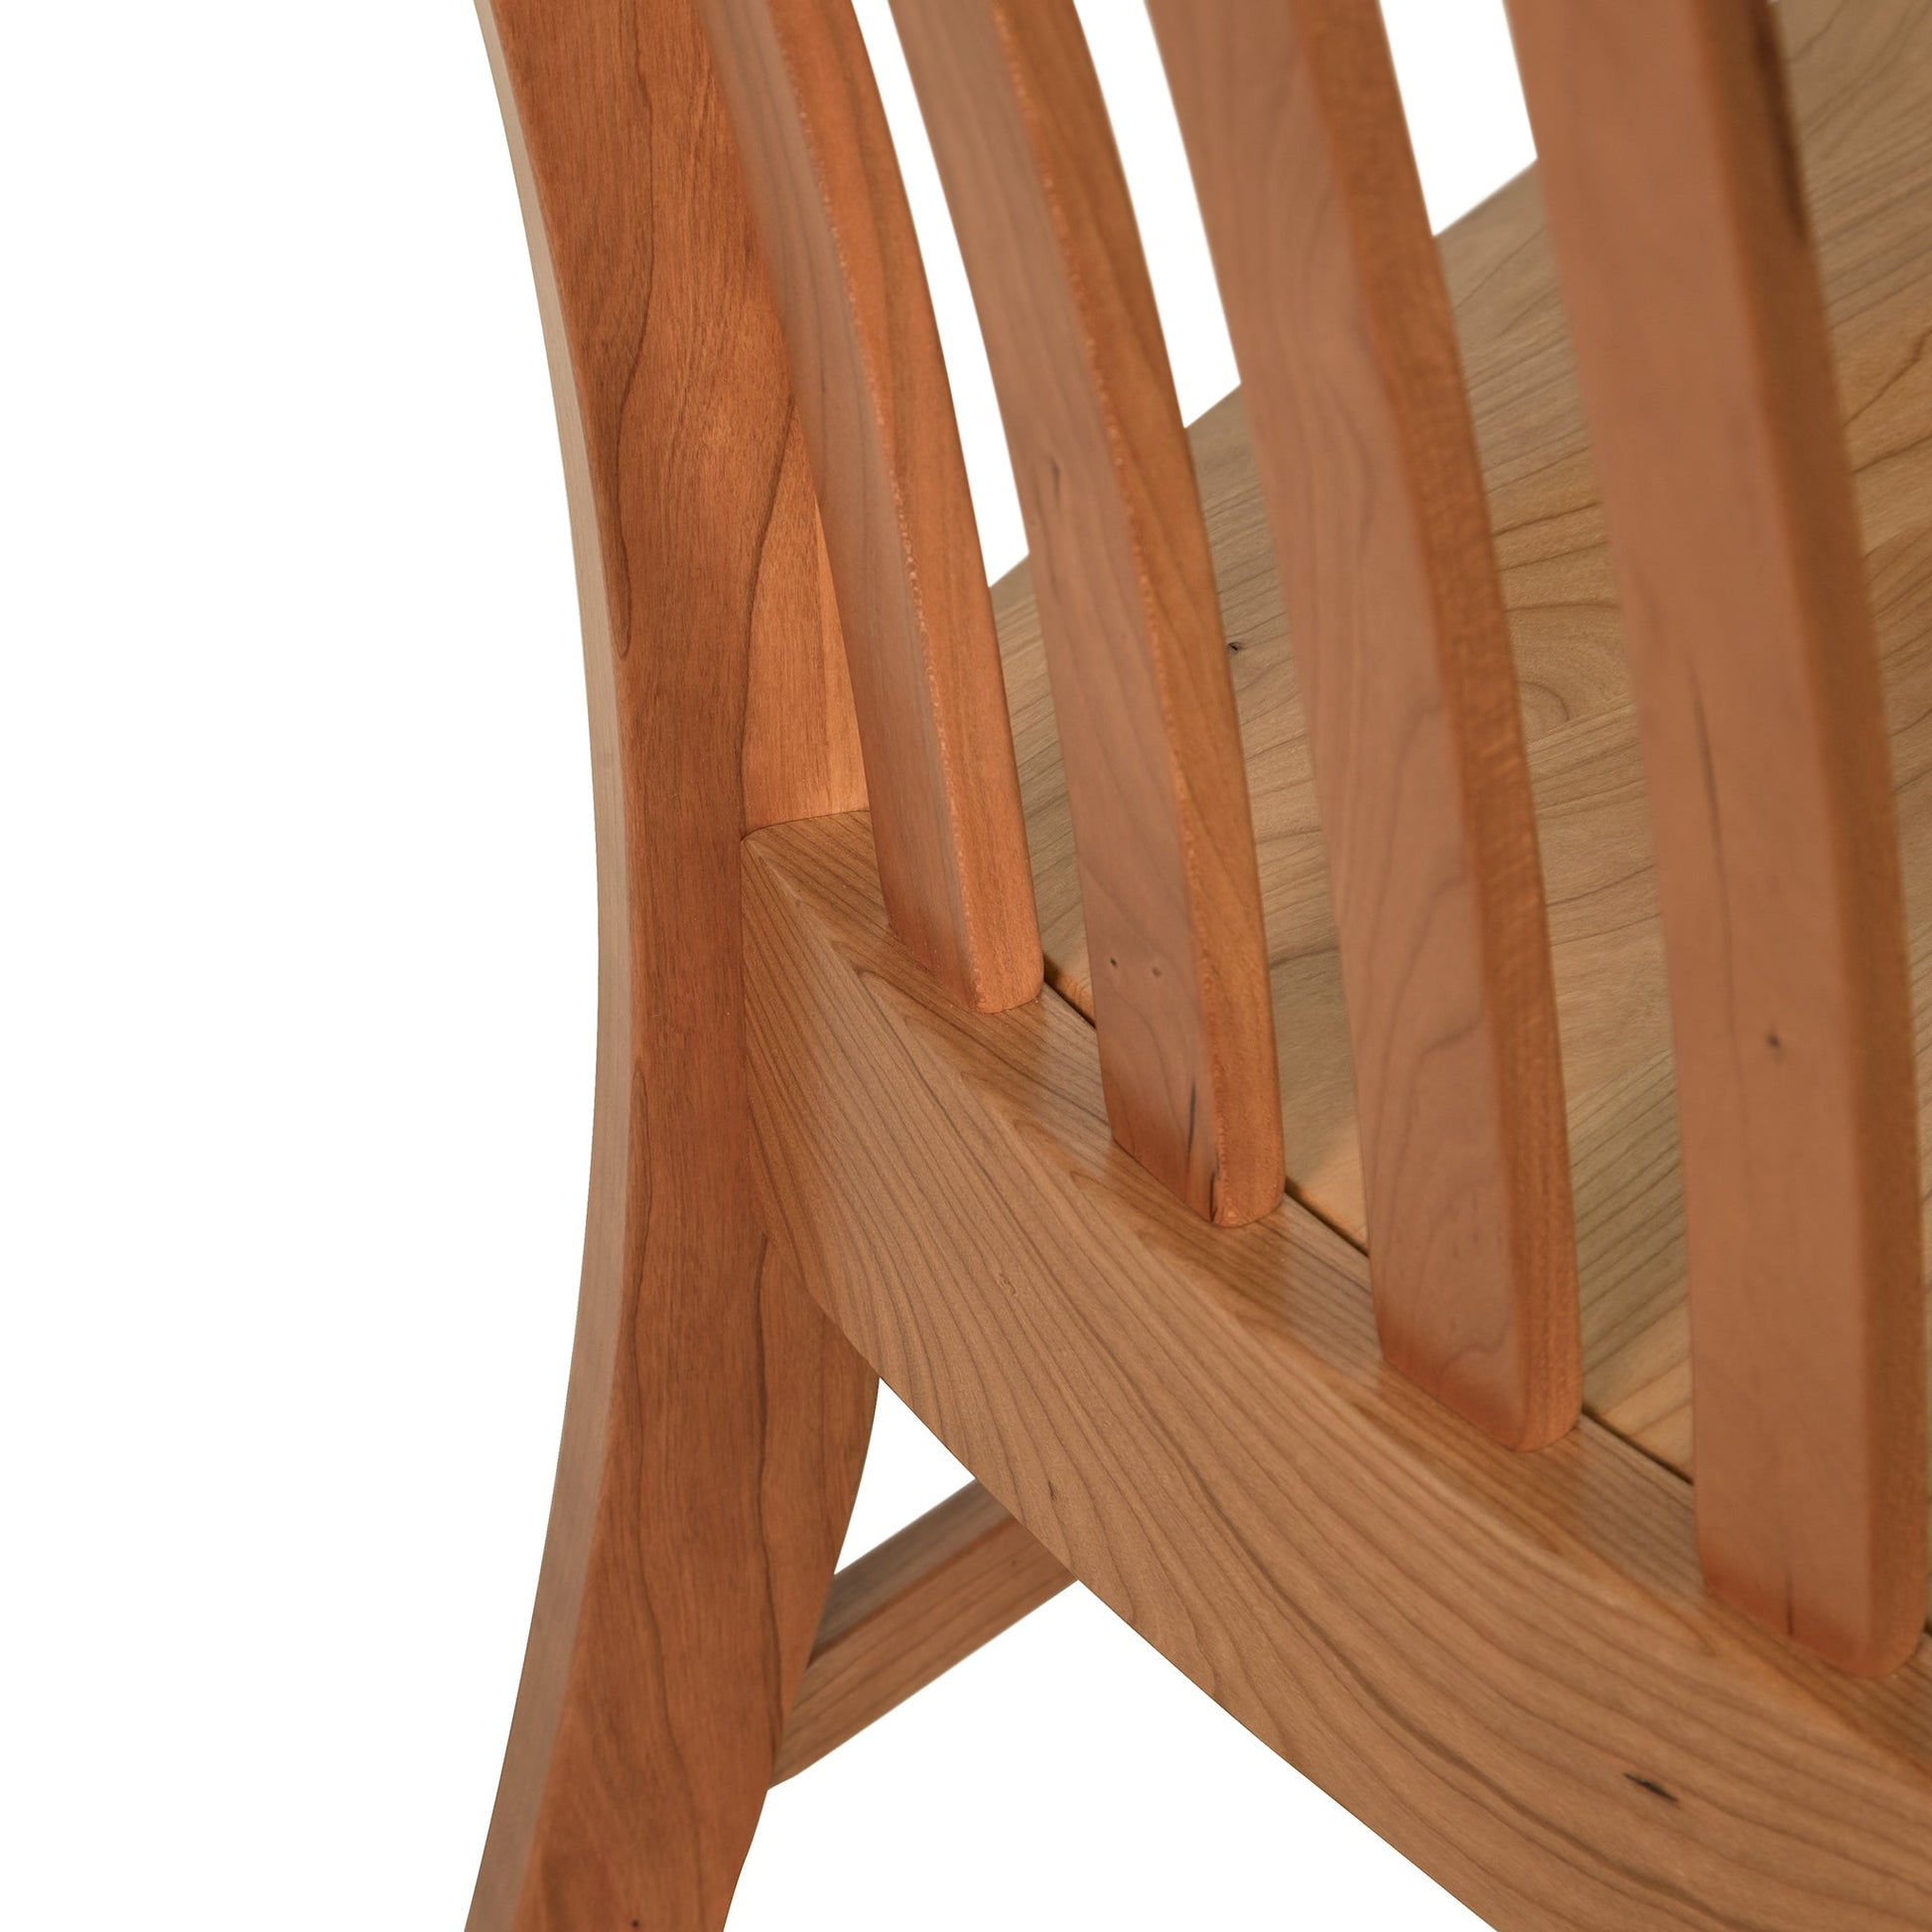 A close up view of a Vermont Woods Studios Country Shaker Side Chair with Scooped Wooden Seat - Ready to Ship.